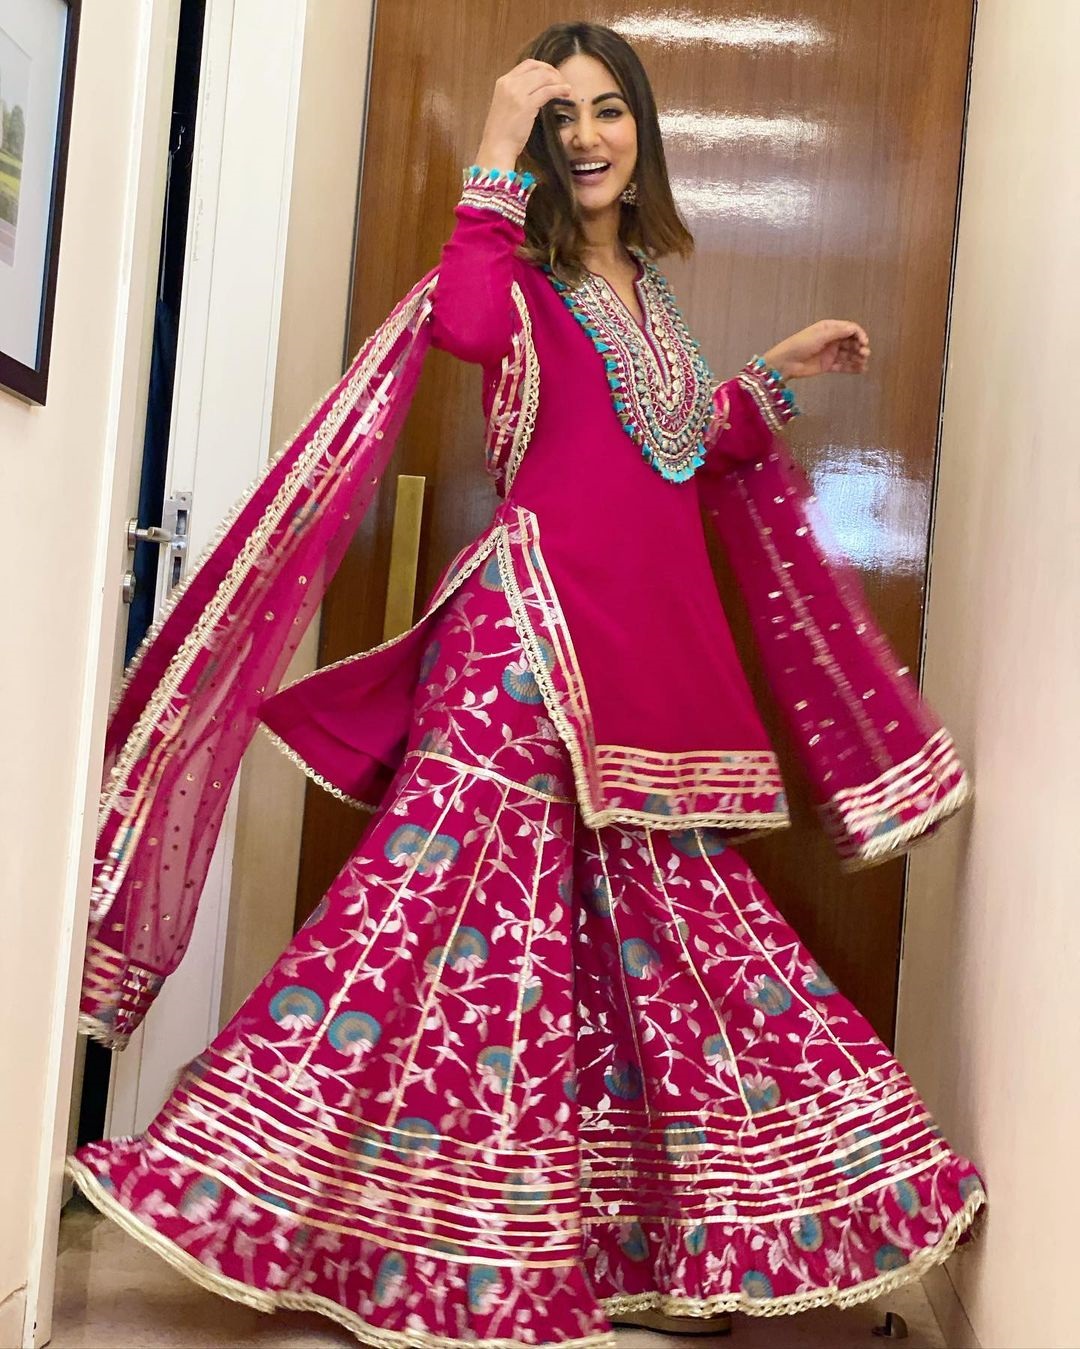 Hina Khan's Pink Modern Floral Sharara Suit Is An Ethnic Inspiration For Every Girl 5